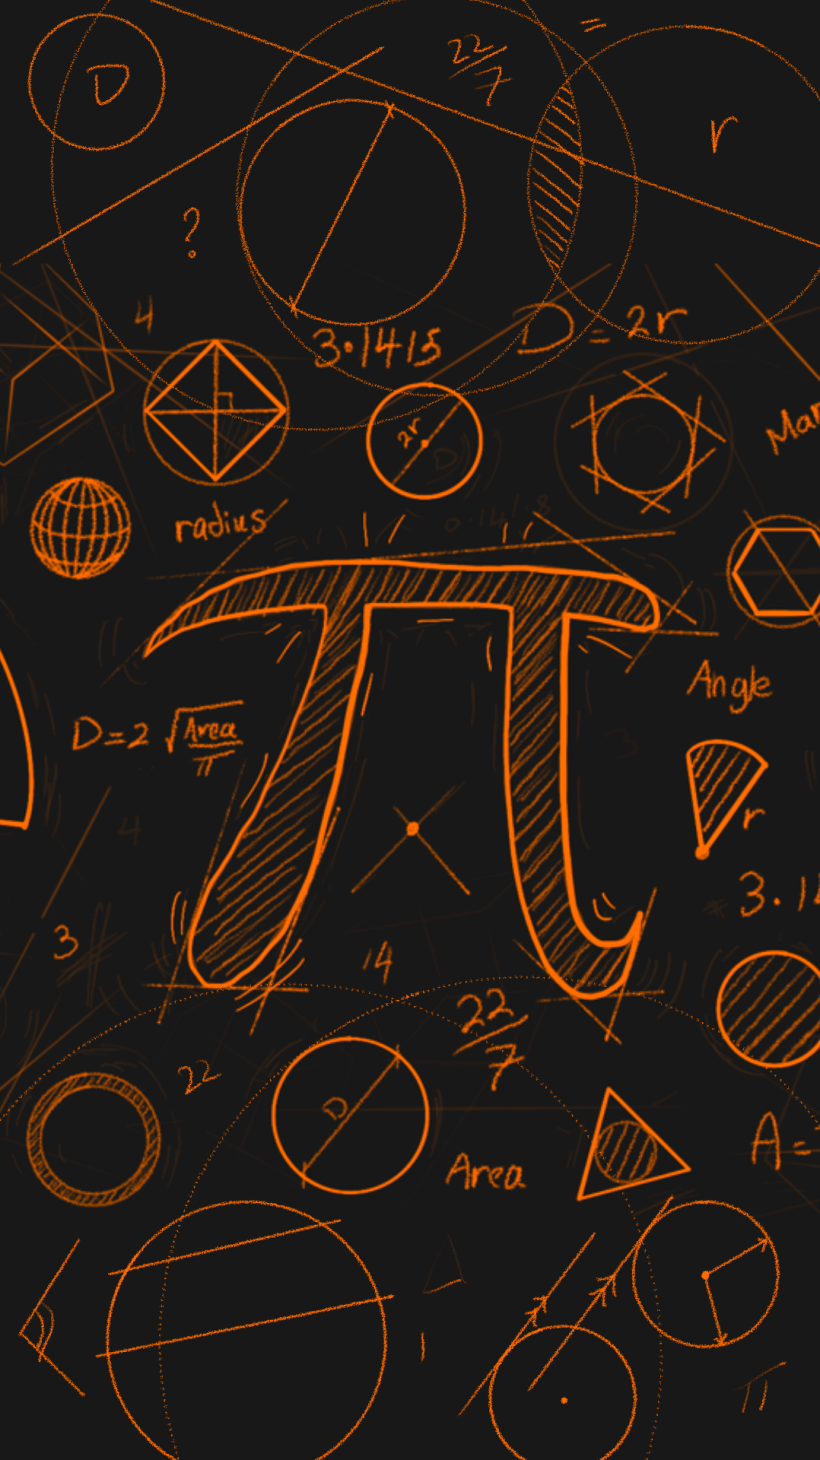 INTERACTIVE - March 14 is Pi Day